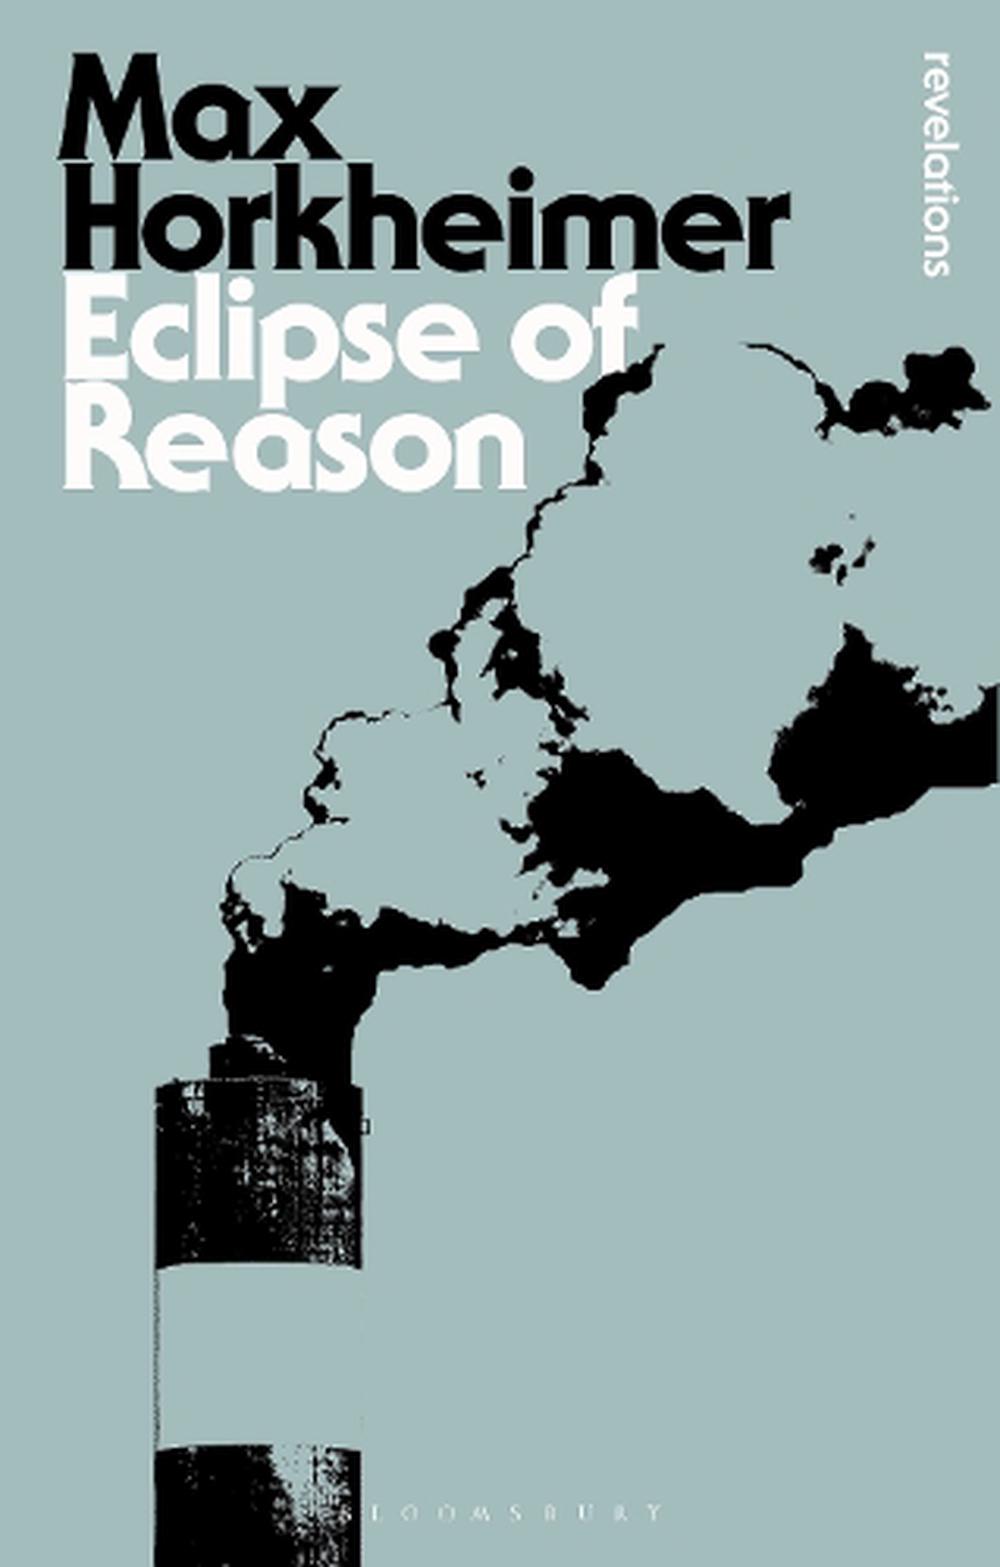 Eclipse of Reason by Max Horkheimer (English) Paperback Book Free